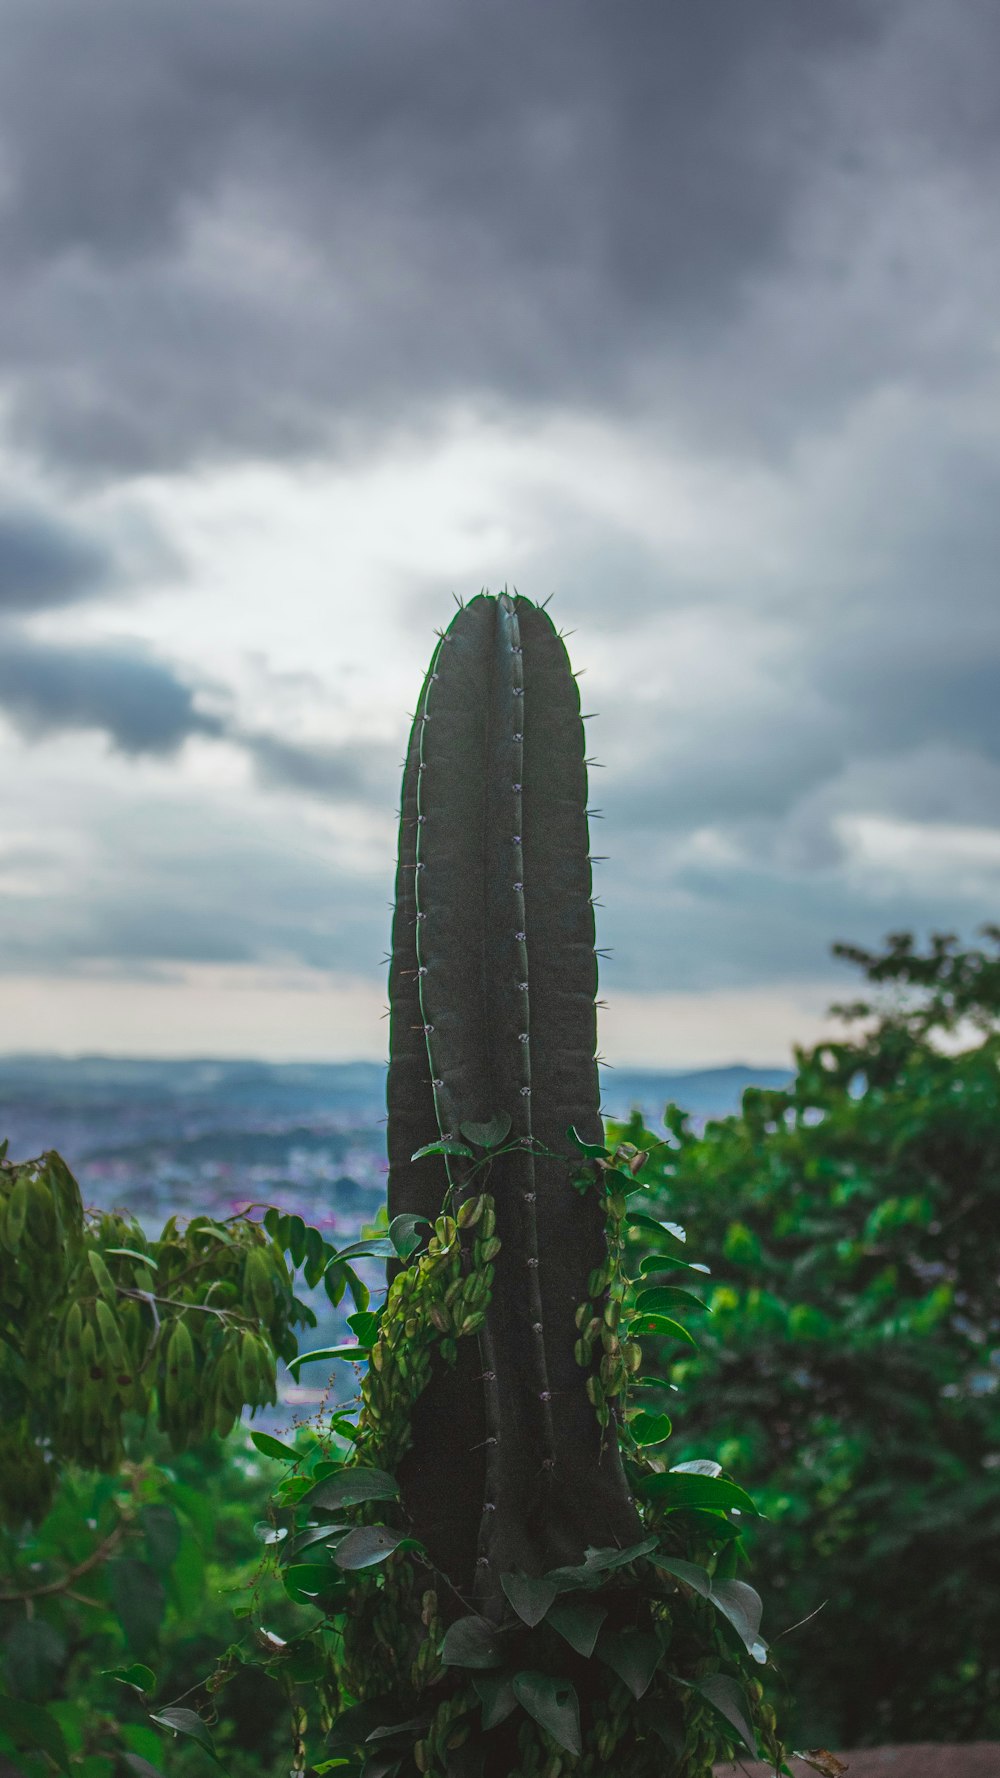 green cactus plant under cloudy sky during daytime